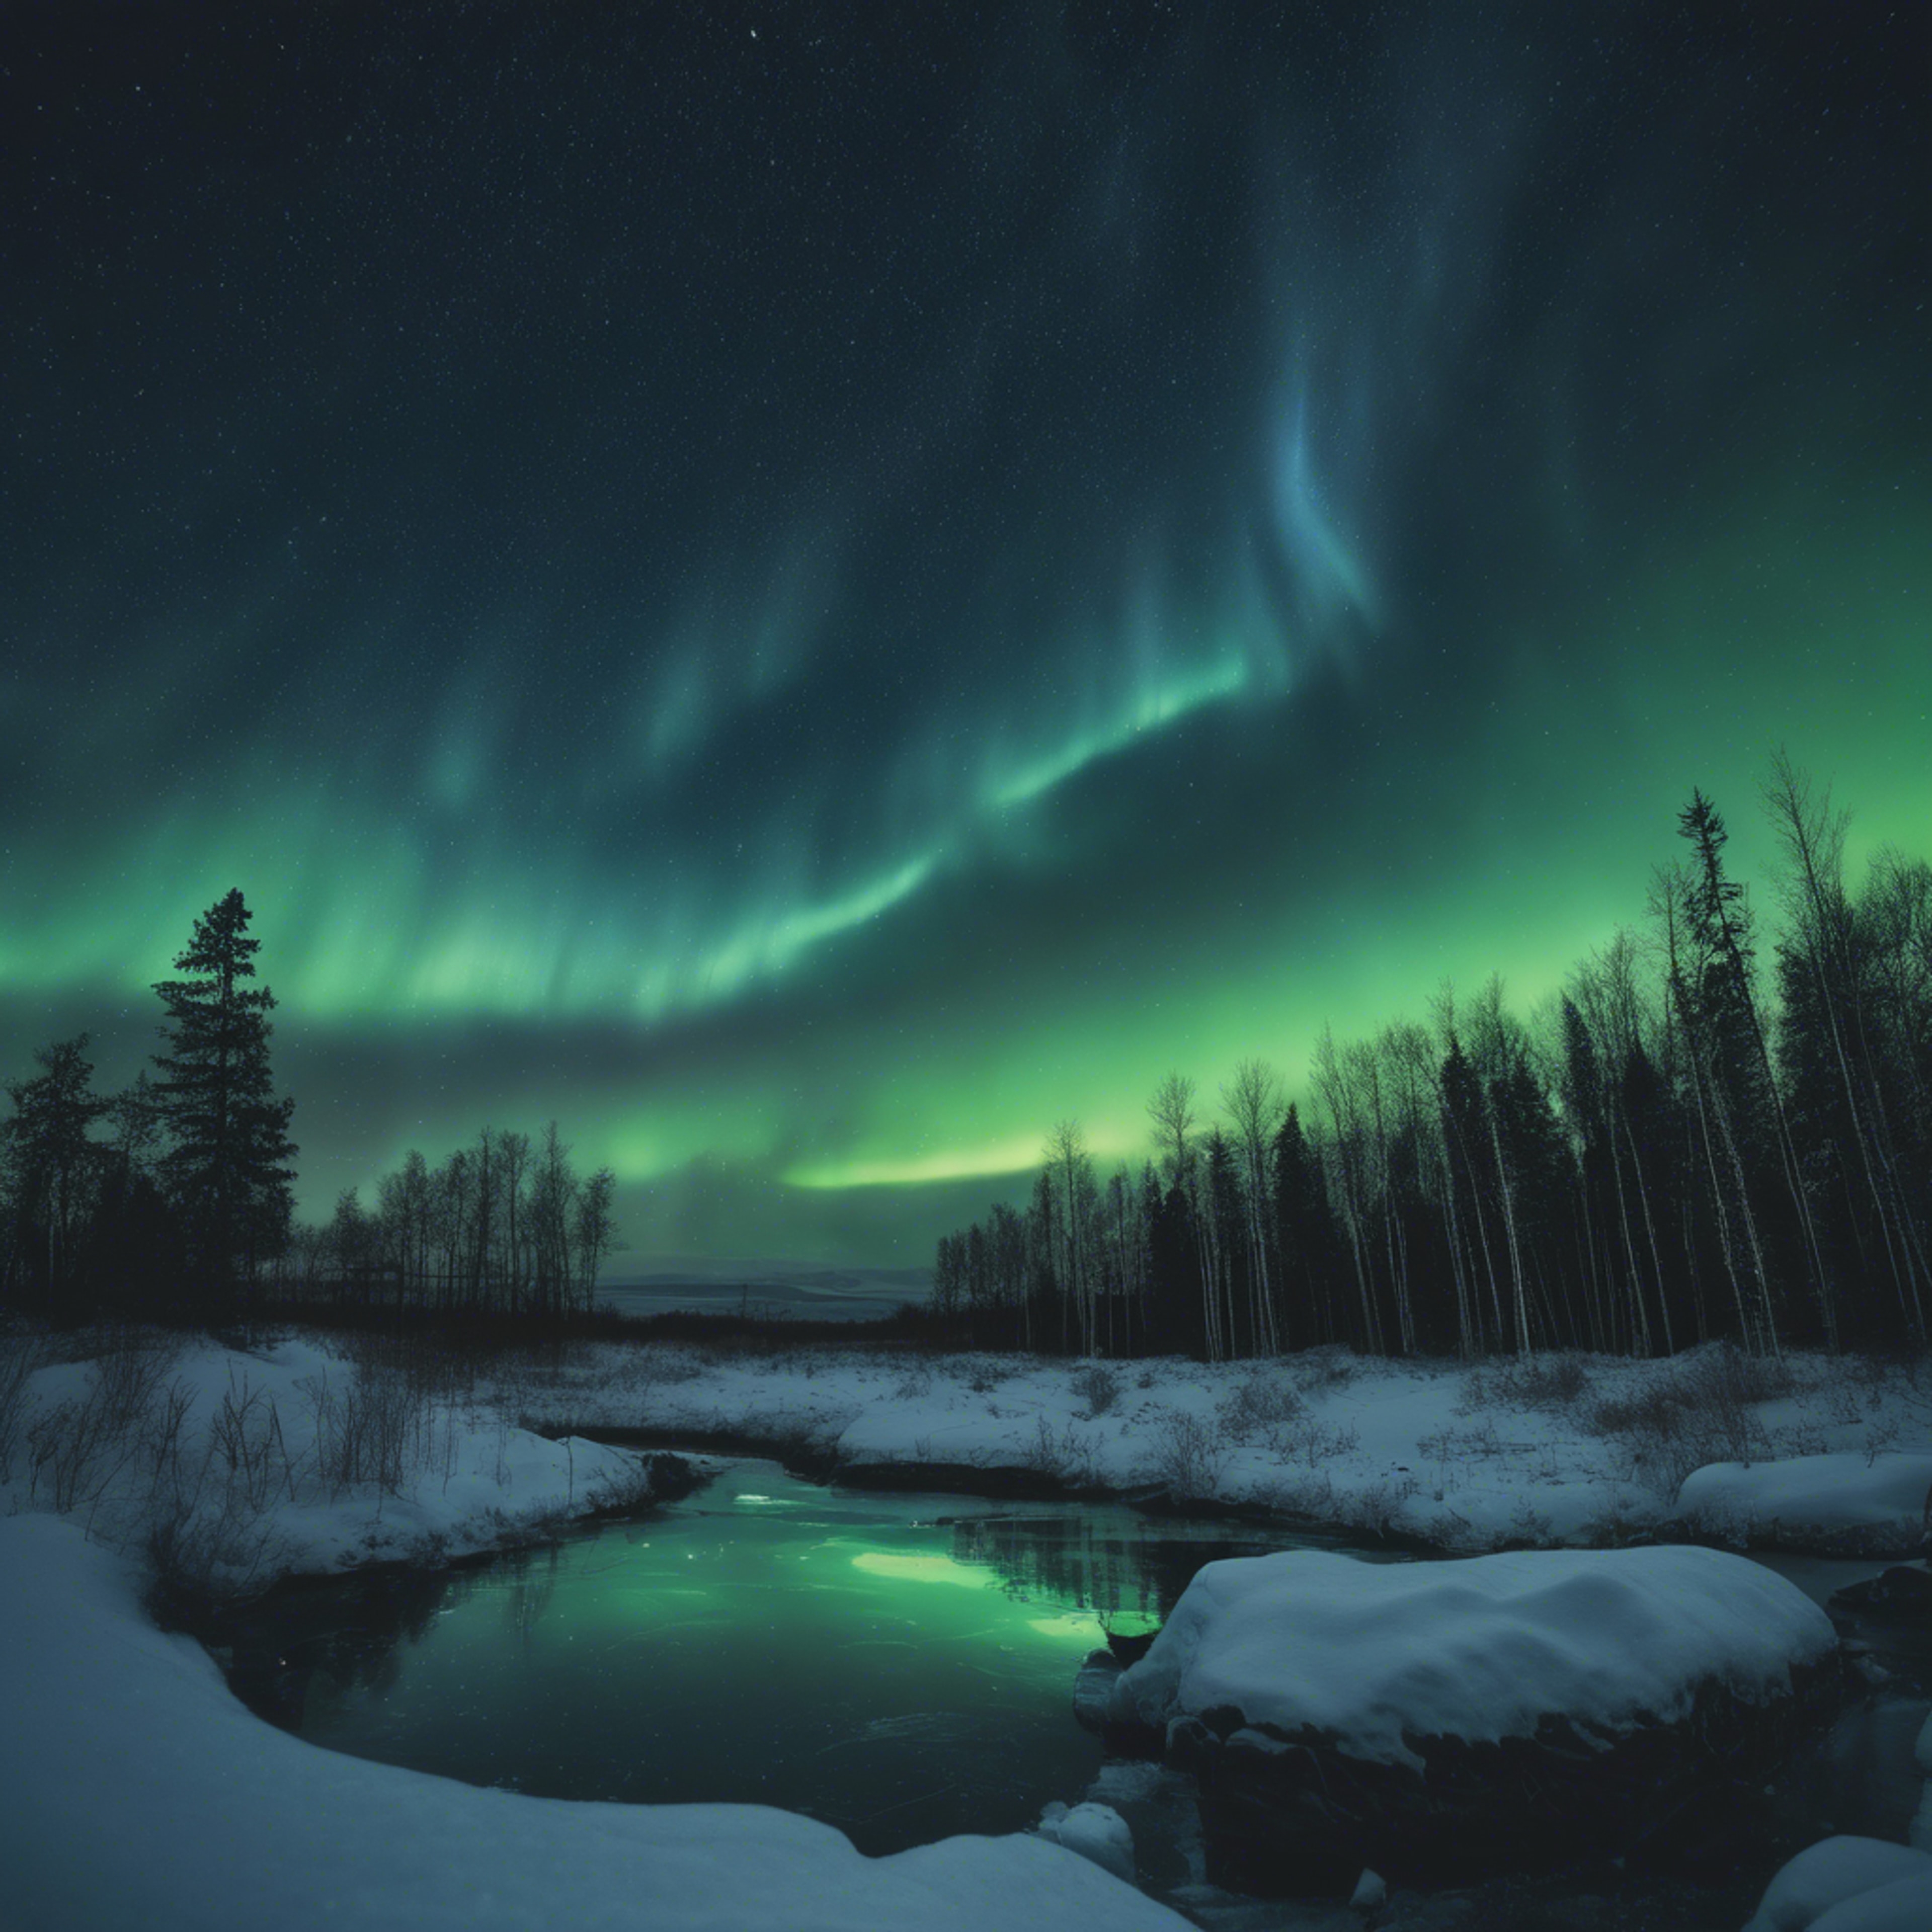 A majestic view of the Northern lights dancing in the night sky, showing various shades of blue and green. Behang[3d23c82dc17f41c8a962]